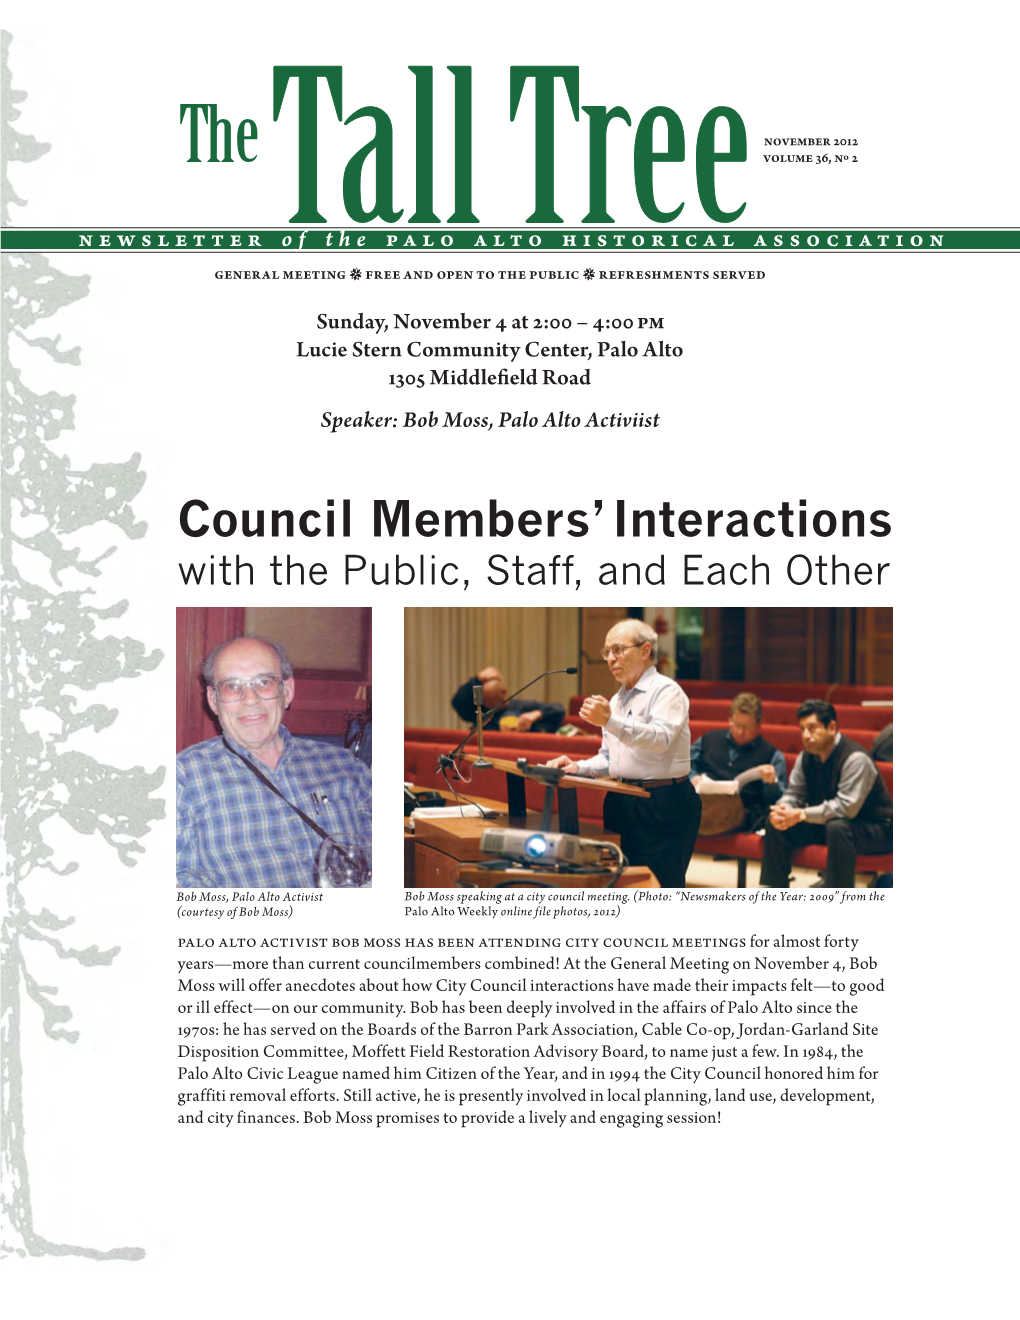 Council Members' Interactions